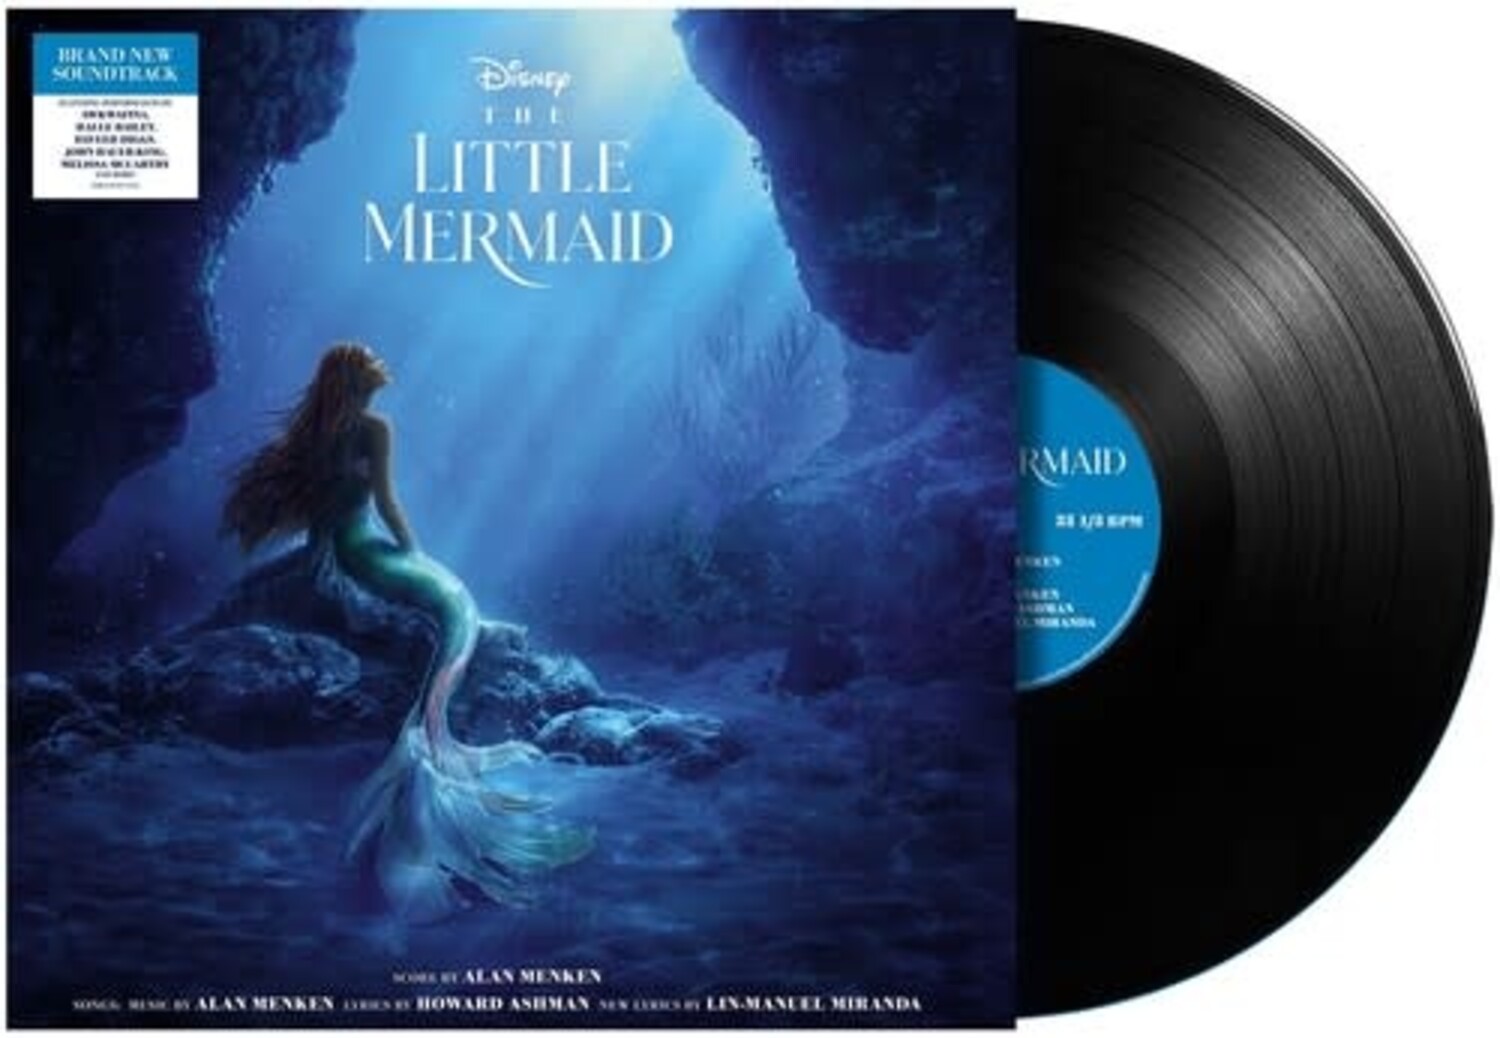 Little Mermaid (Live Action) Soundtrack LP Wax Trax Records